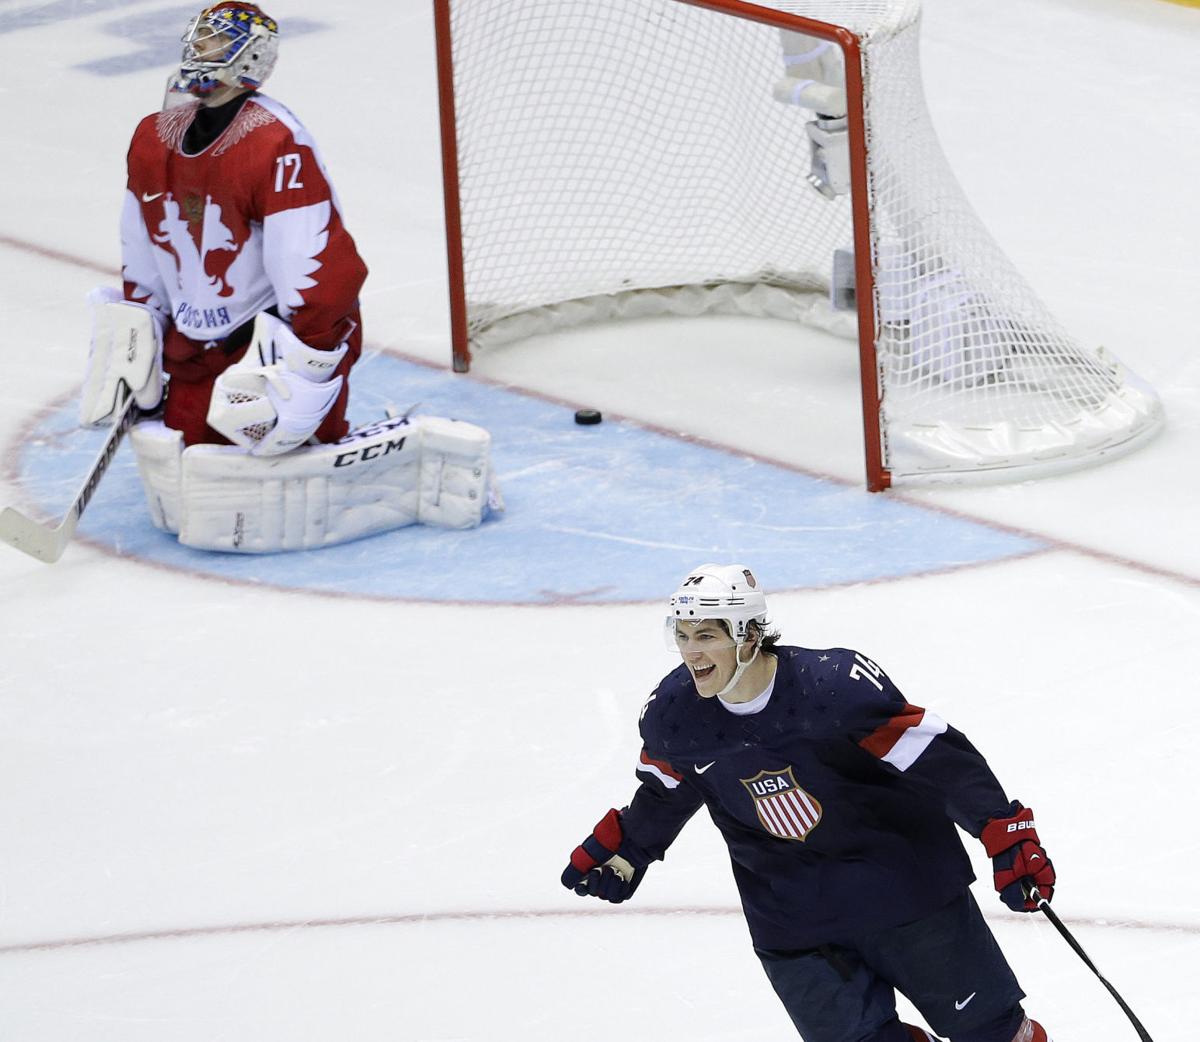 Hamden's Jonathan Quick, T.J. Oshie lead U.S. past Russia in shootout